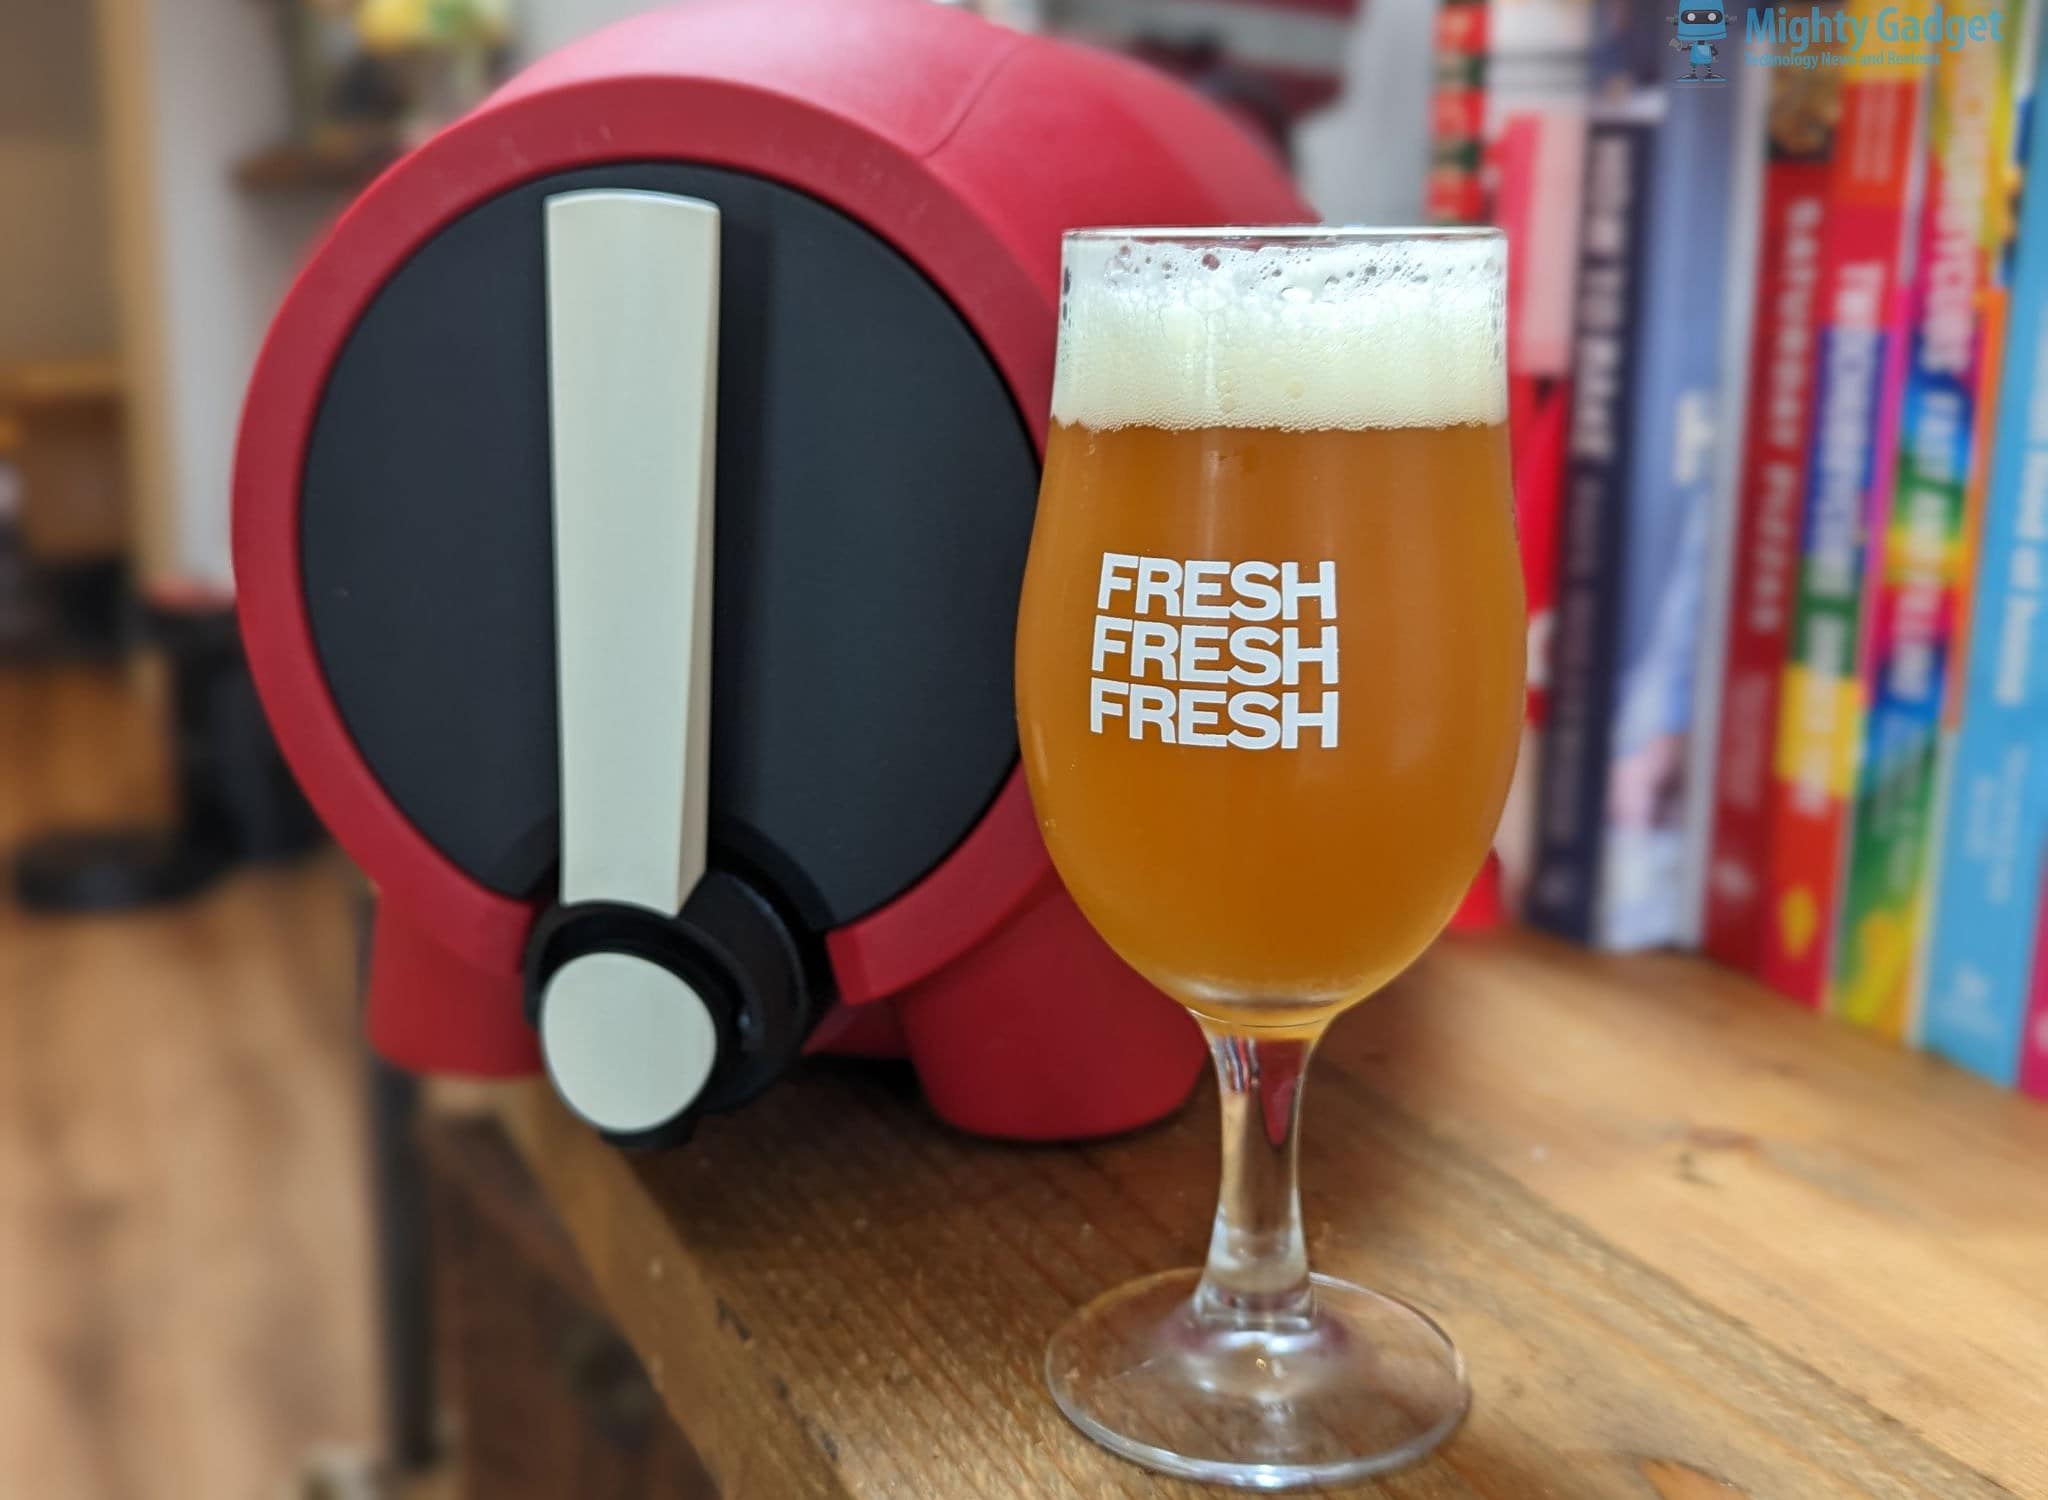 Pinter 3 Homebrew Beer Review by Mighty Gadget